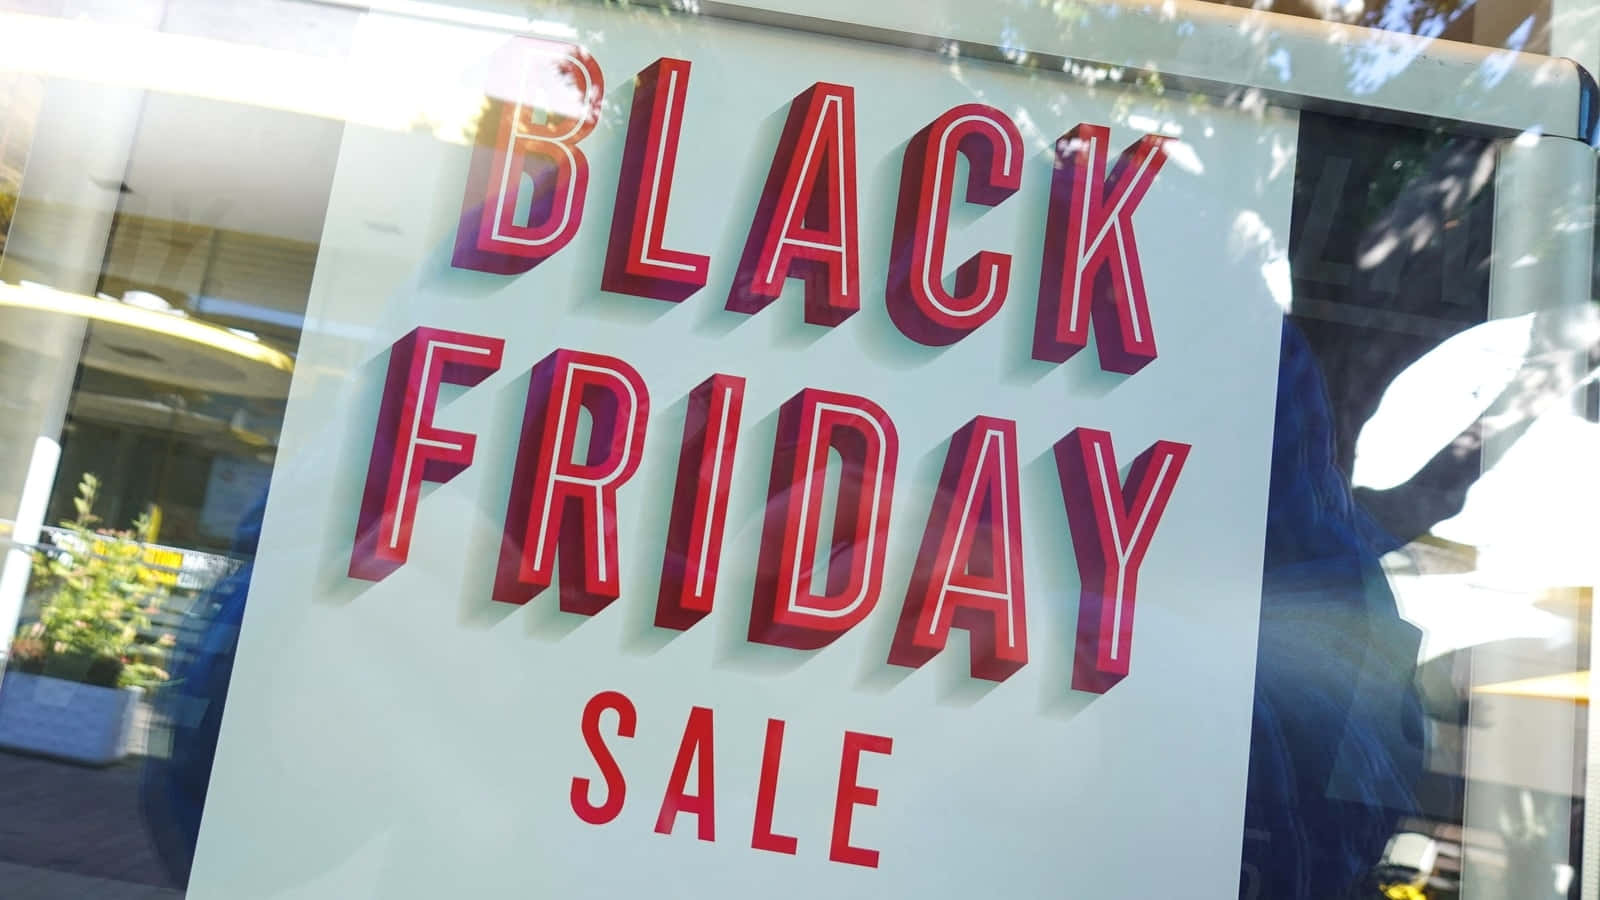 Black Friday Sale Sign In A Store Window